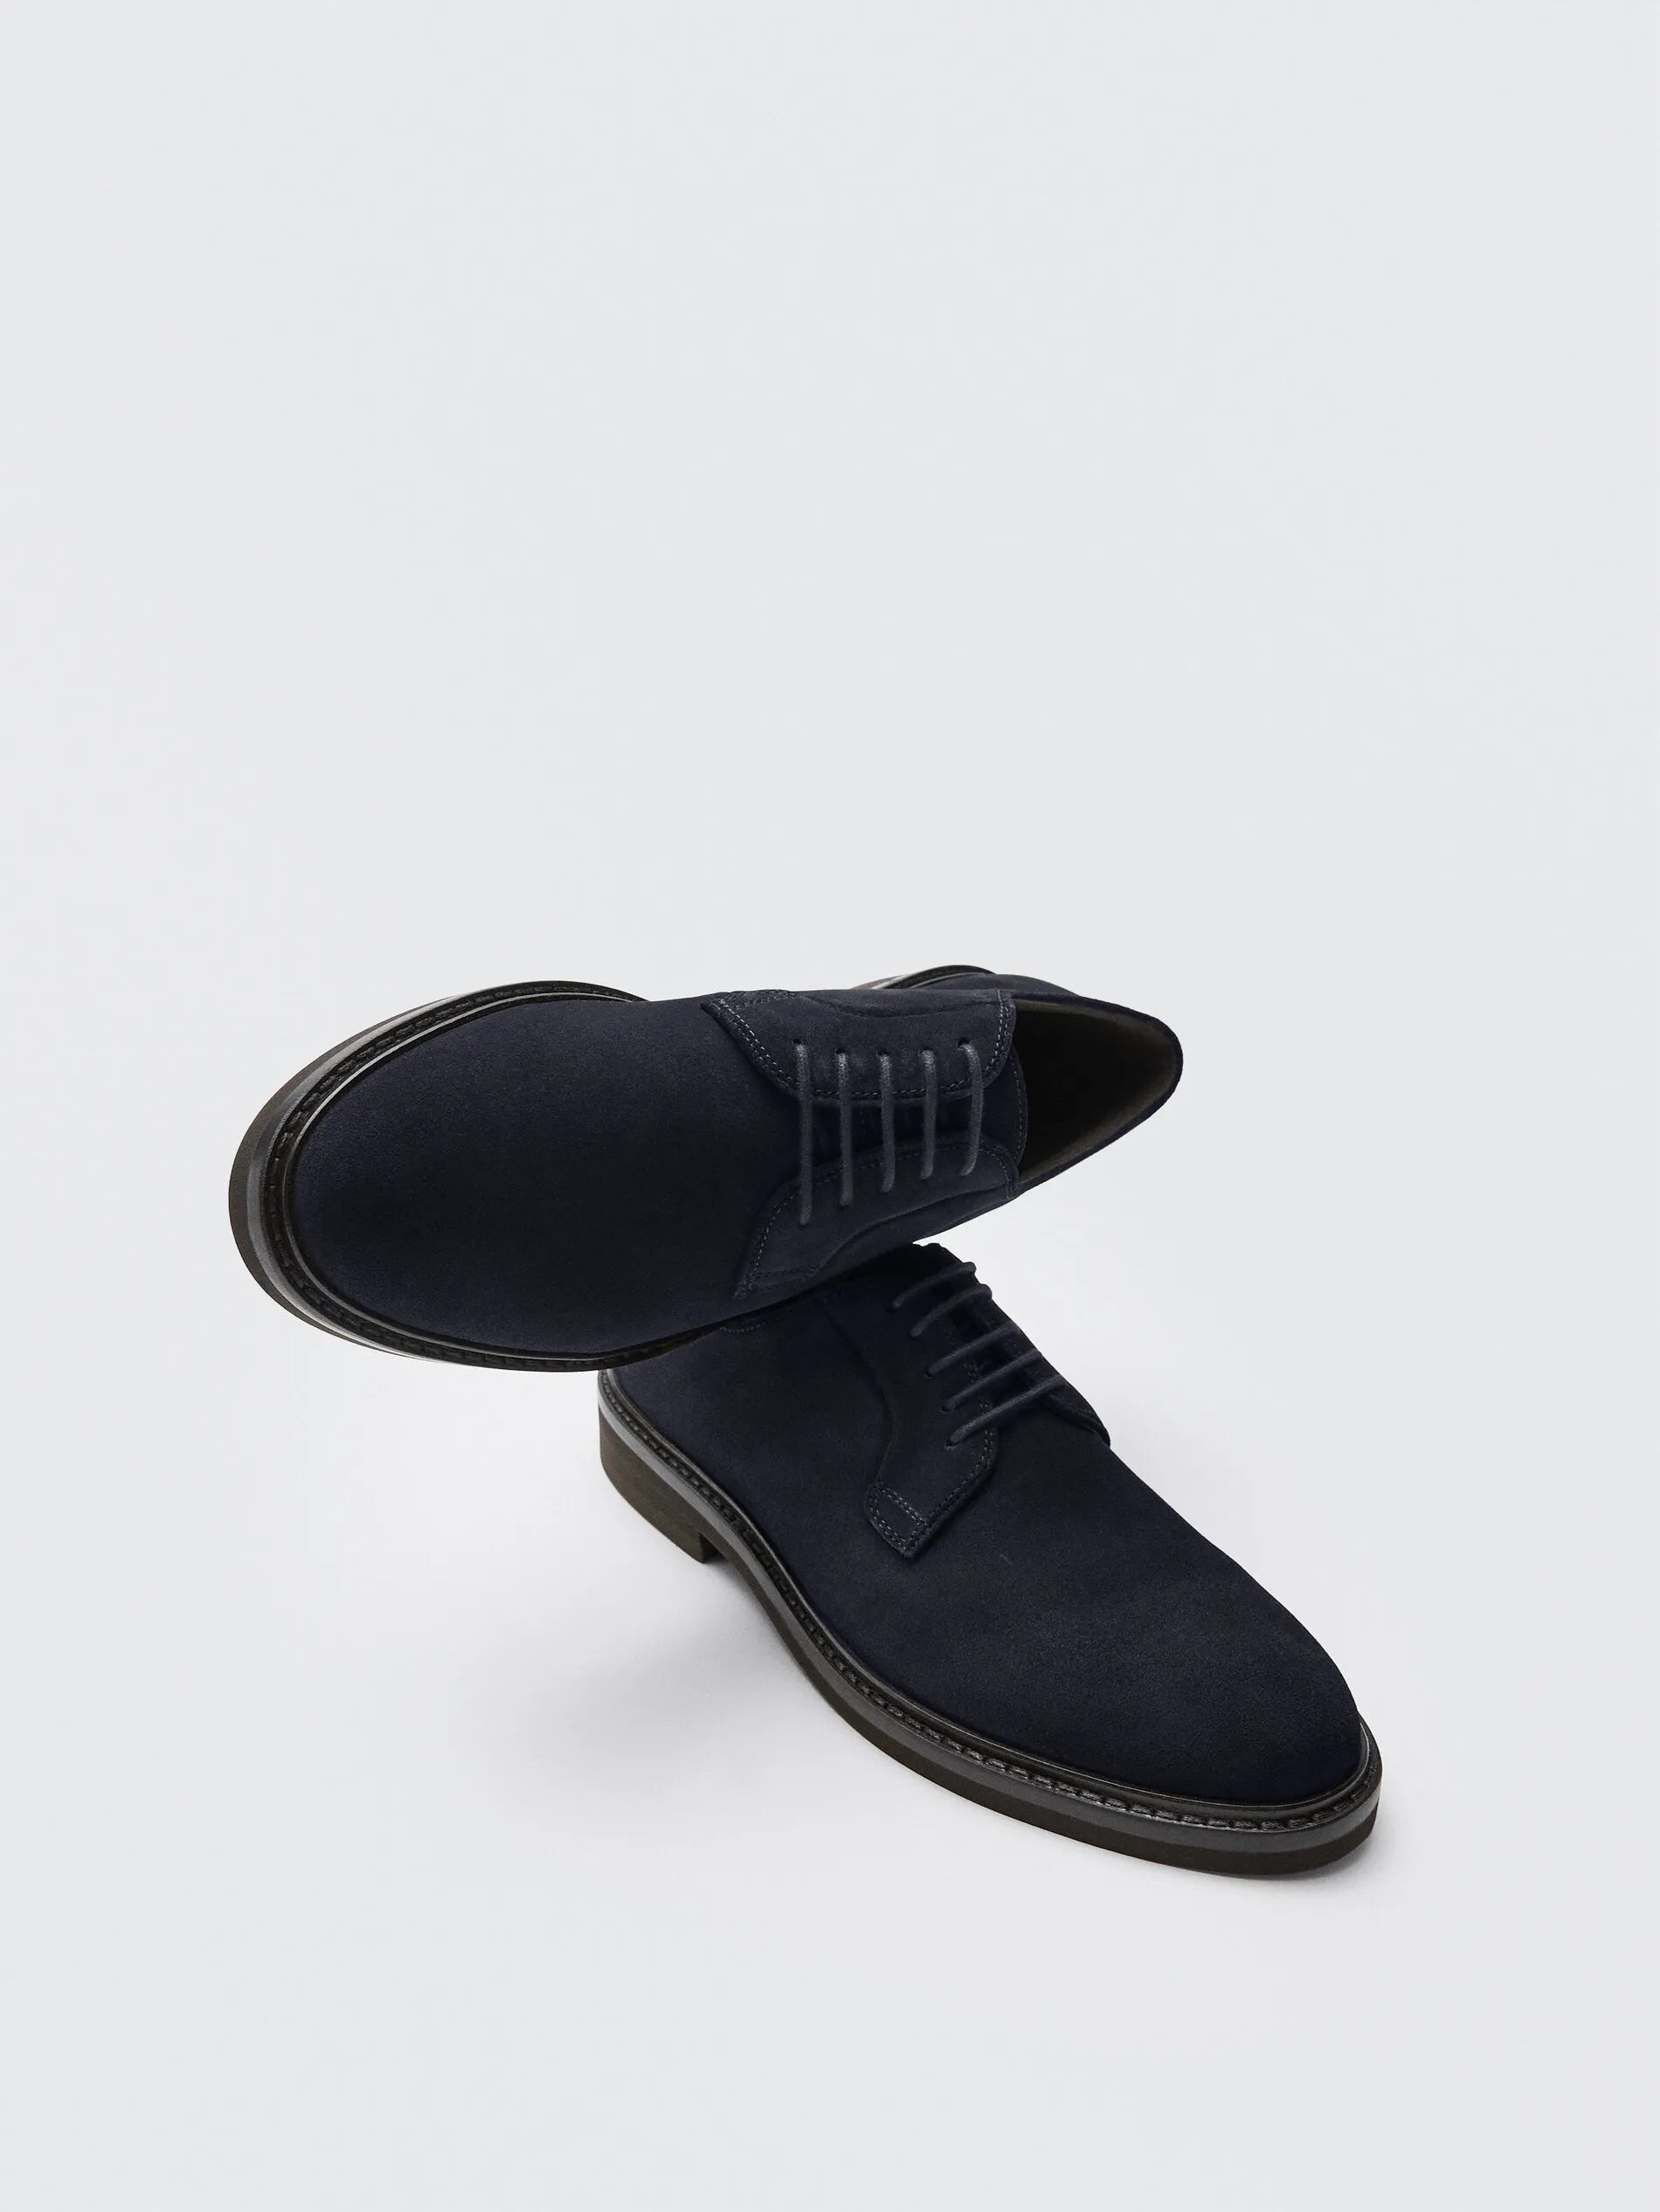 Massimo Dutti Suede Black Leather Formal Shoes For Men - 2201850400